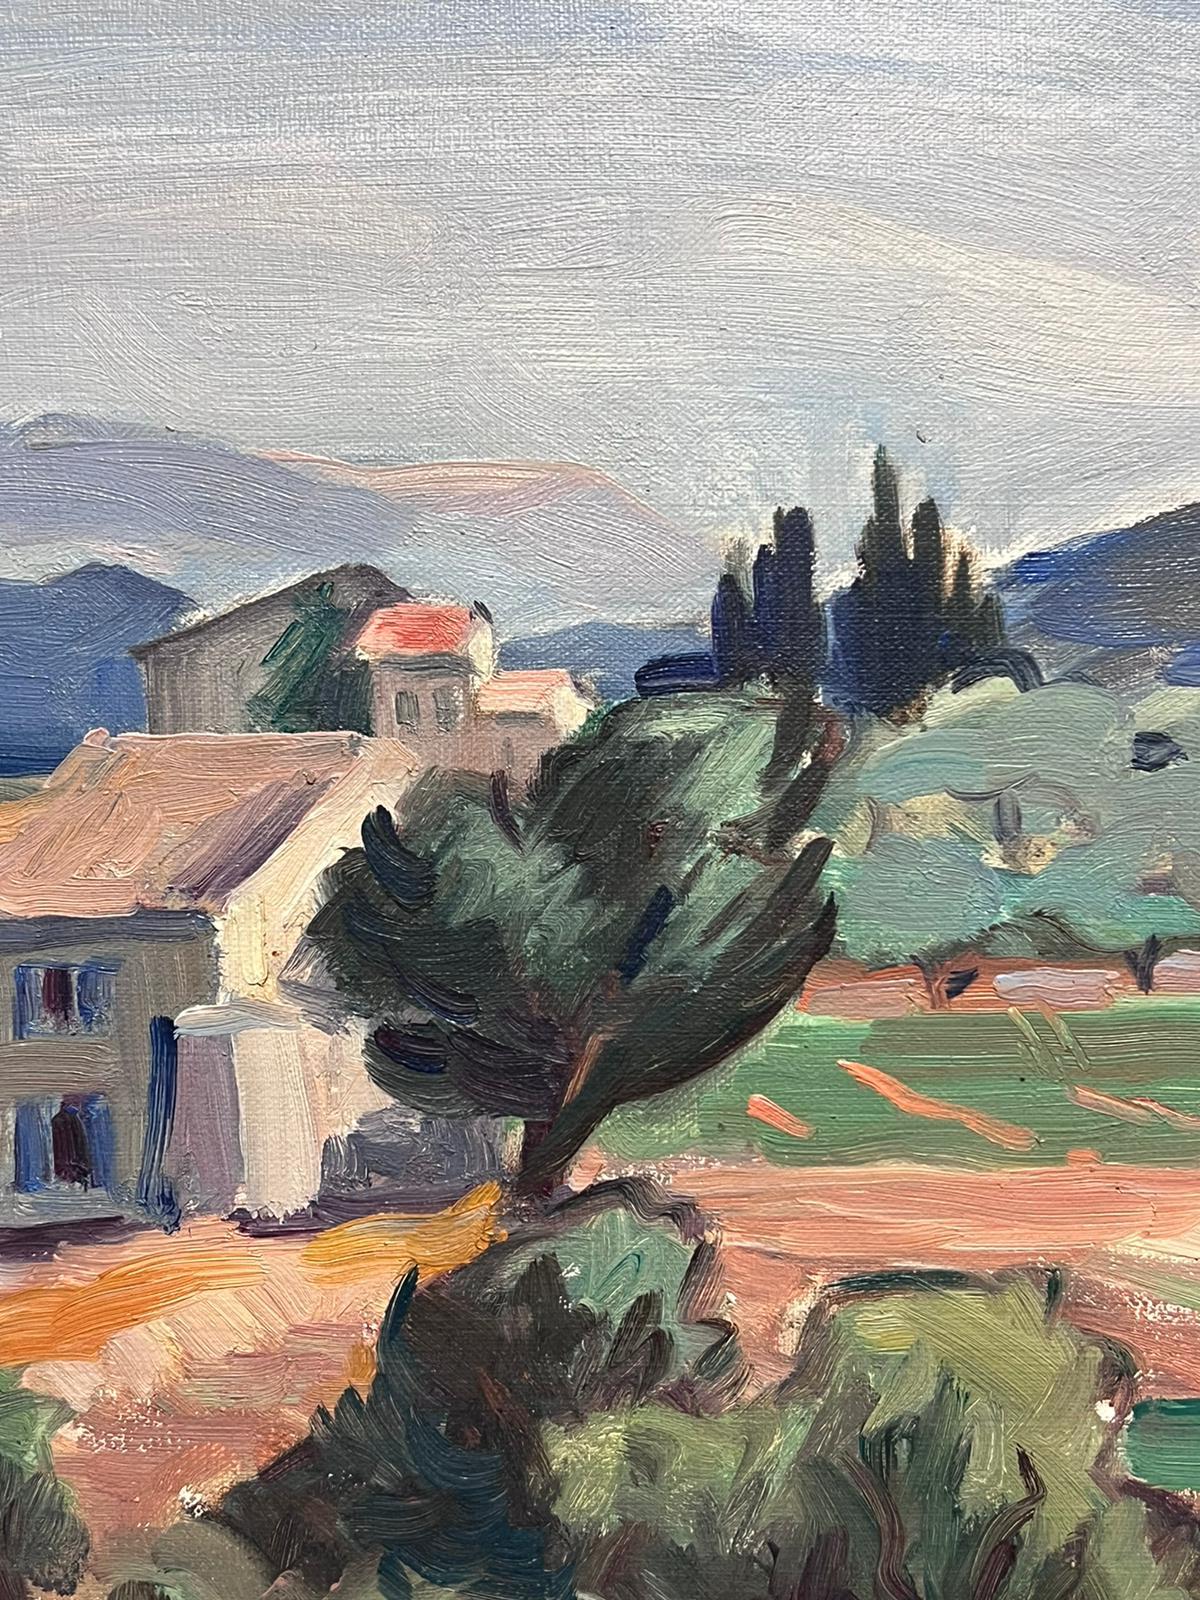 Les Alpilles, St. Remy-de-Provence
French School, mid 20th century
signed oil on board, framed
framed: 18 x 21 inches
board: 13 x 16 inches
provenance: private collection, Paris
condition: very good and sound condition 

We believe that the view